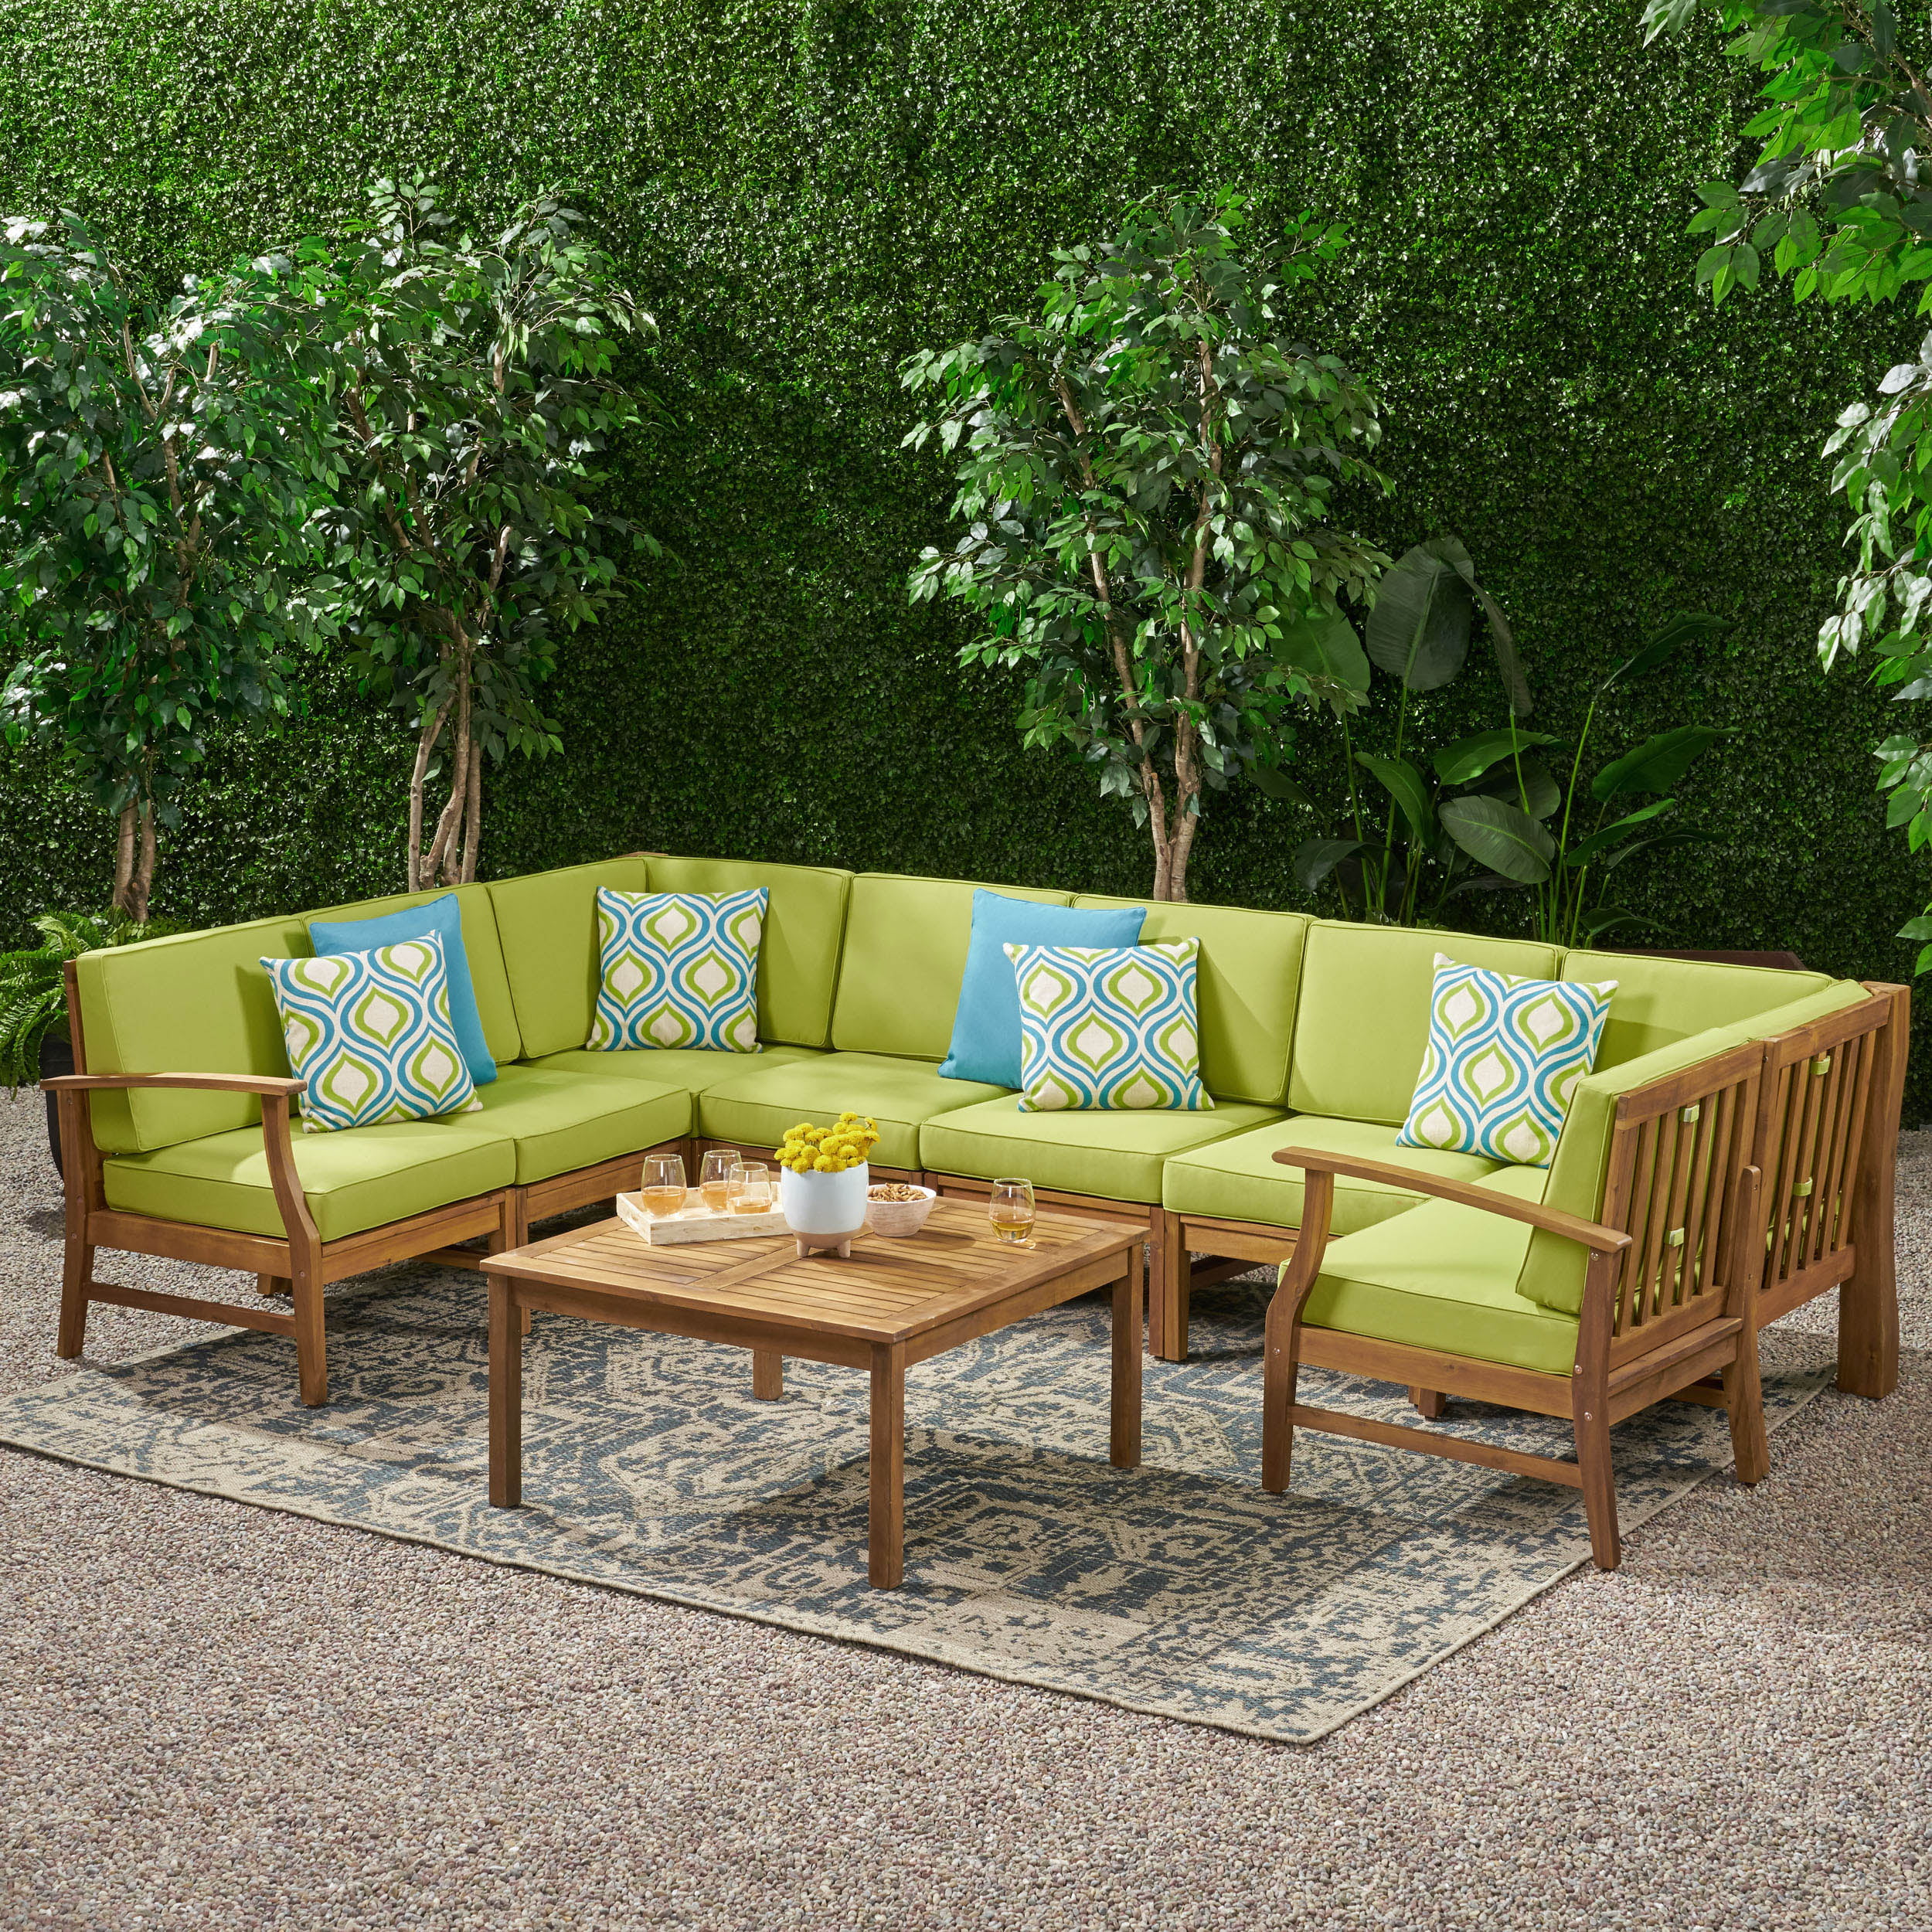 Transform Your Outdoor Space With Teak Furniture